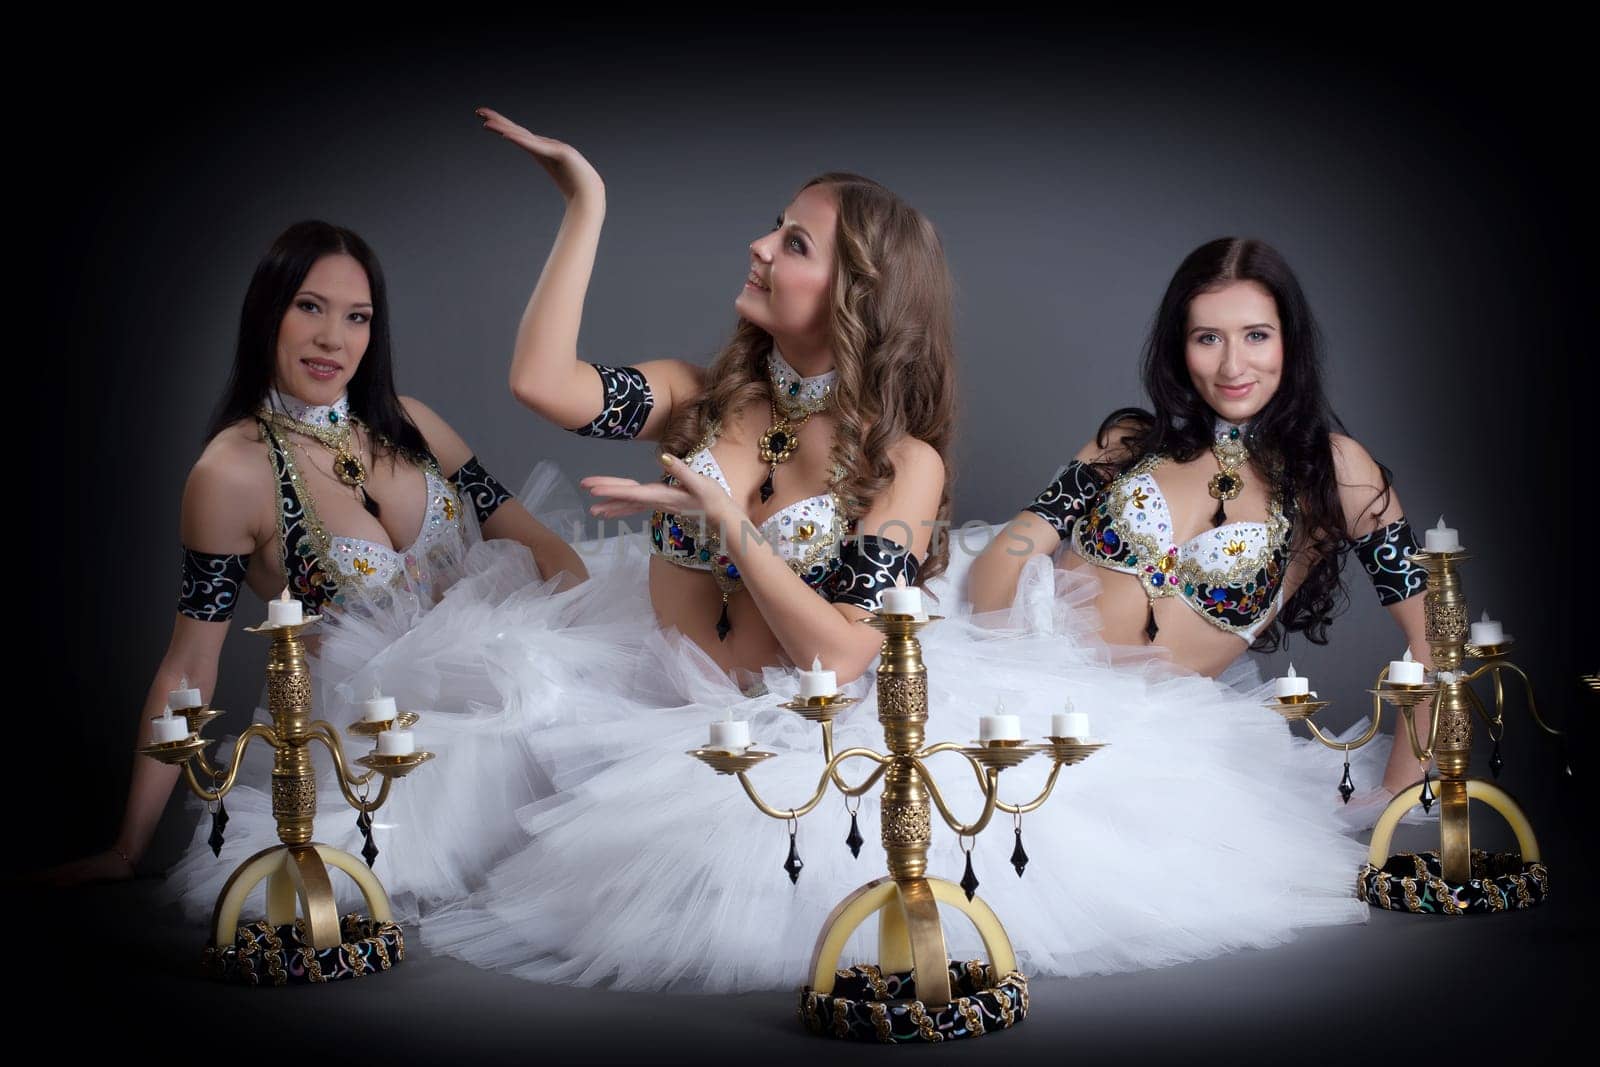 Charming belly dancers posing with chandeliers by rivertime